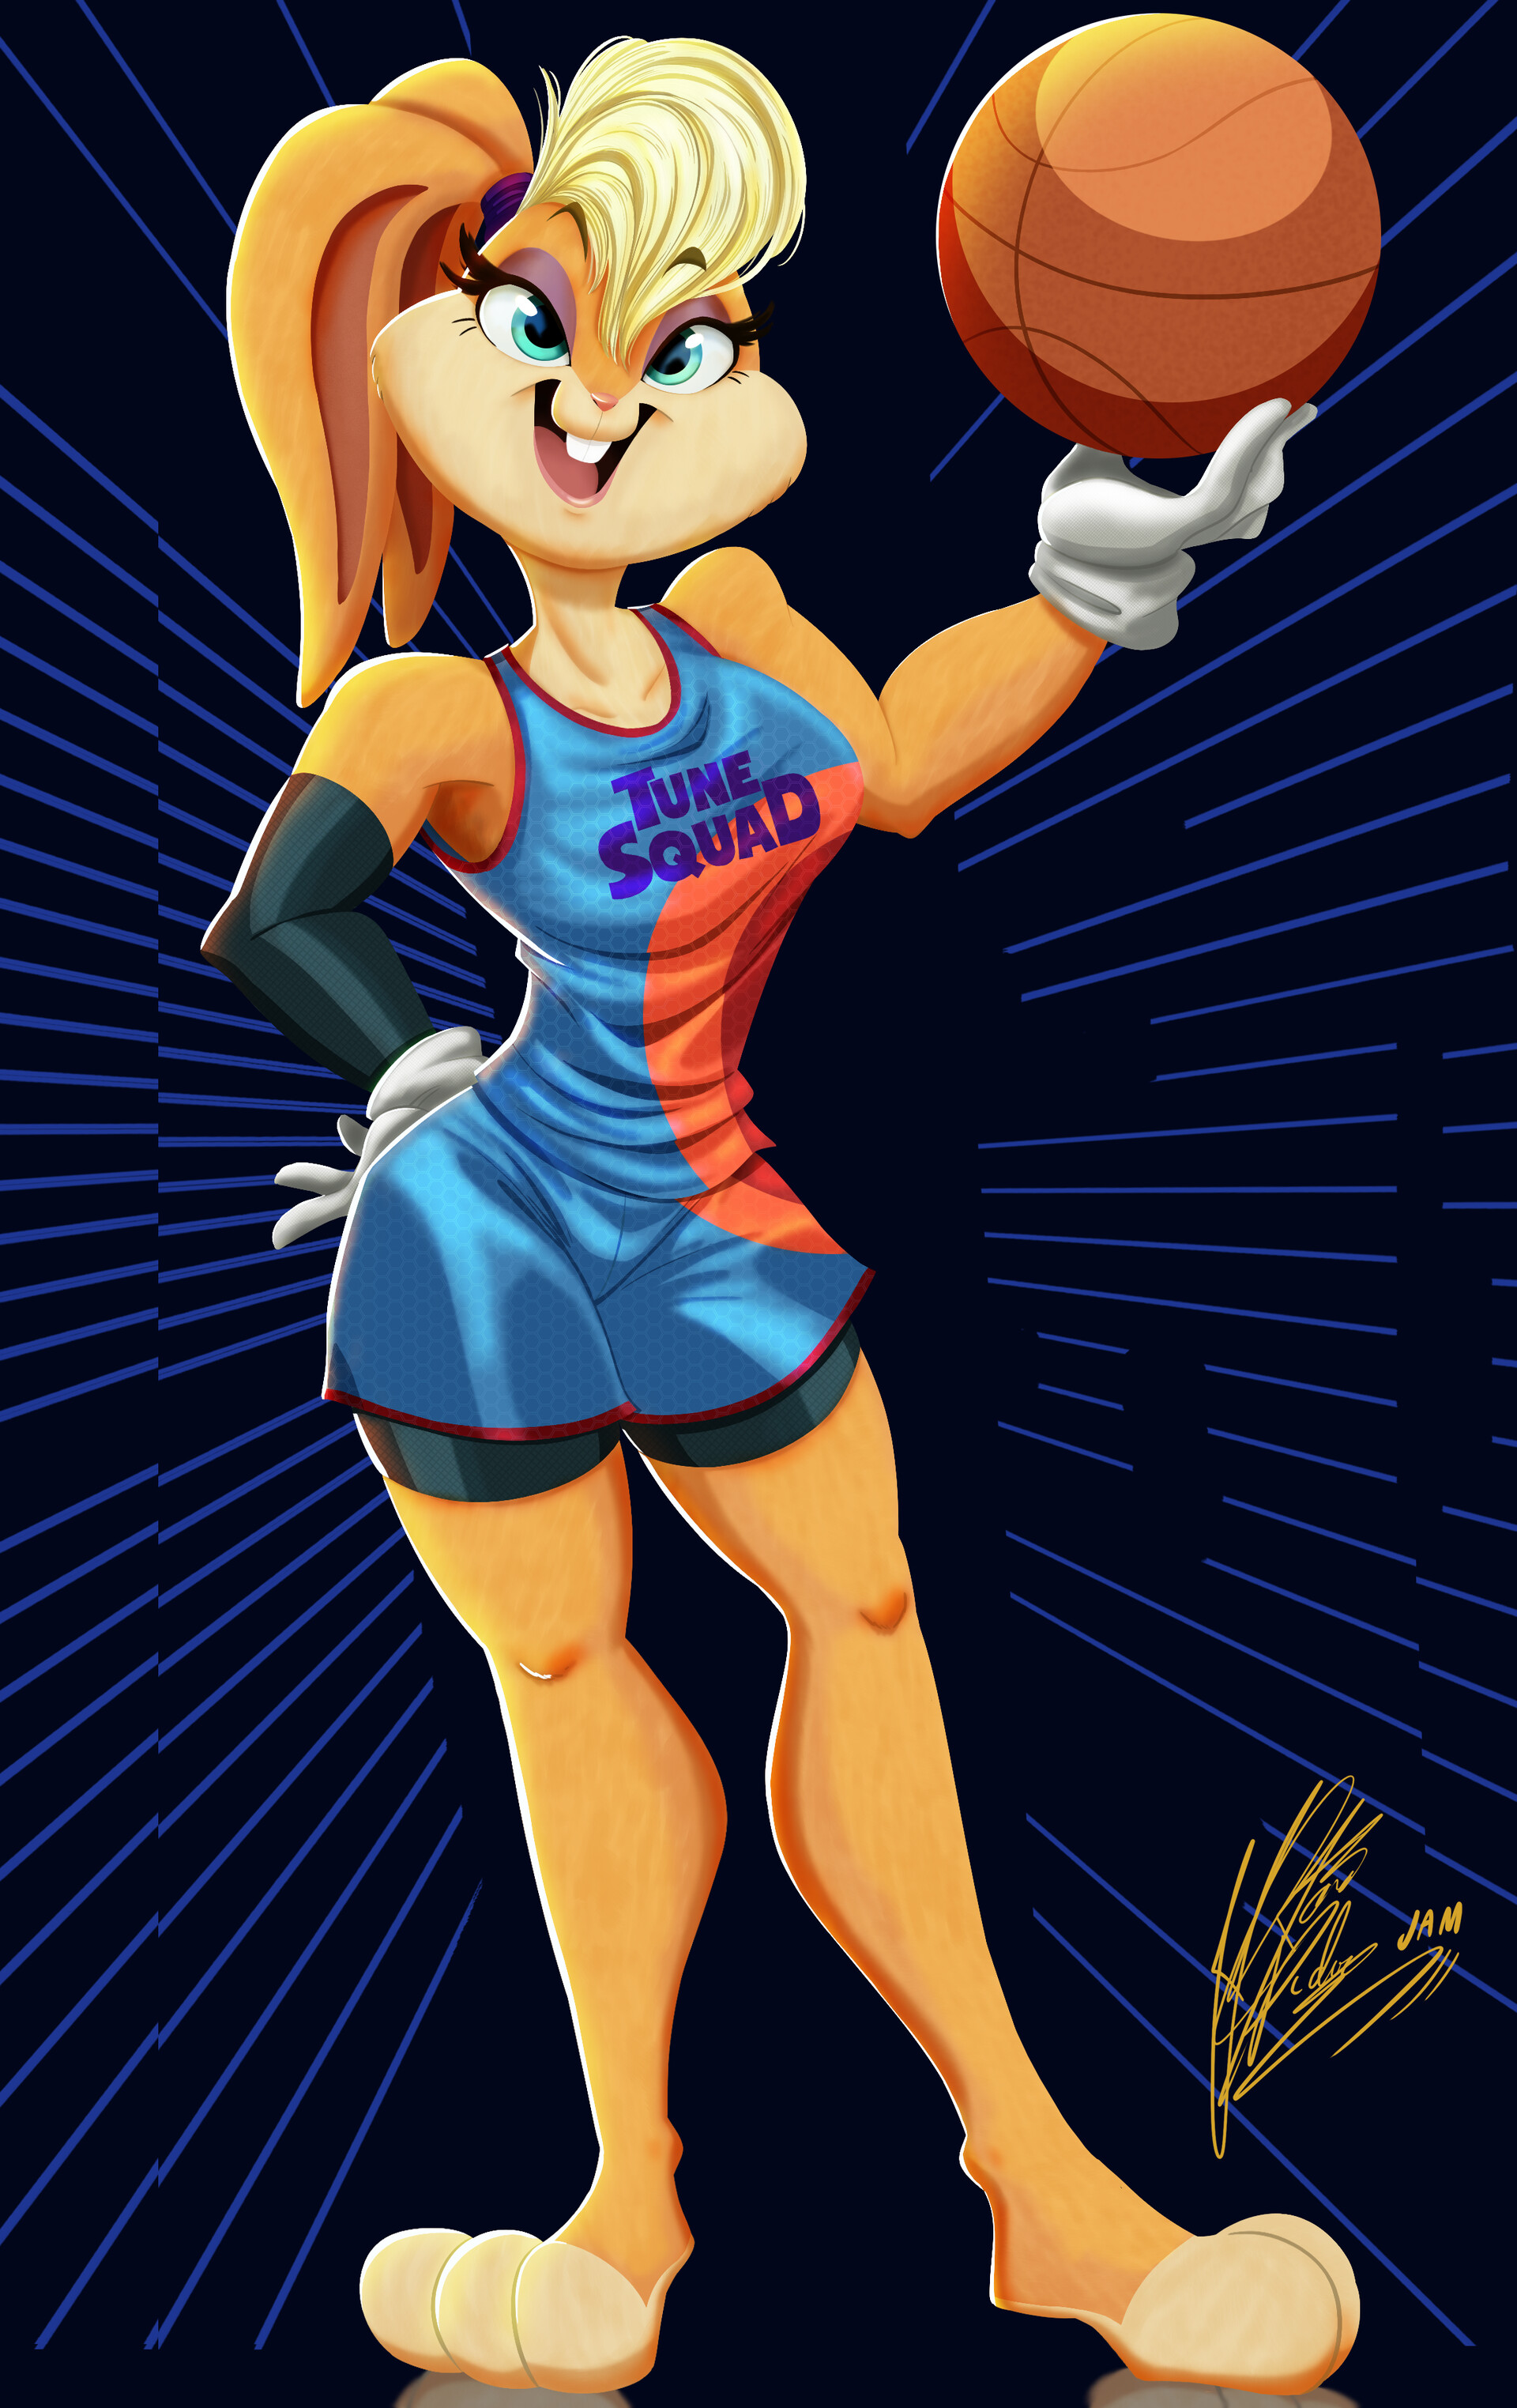 Space Jam 2 Lola Space Jam 2 Trailer Includes Lola Bunny Tribute To